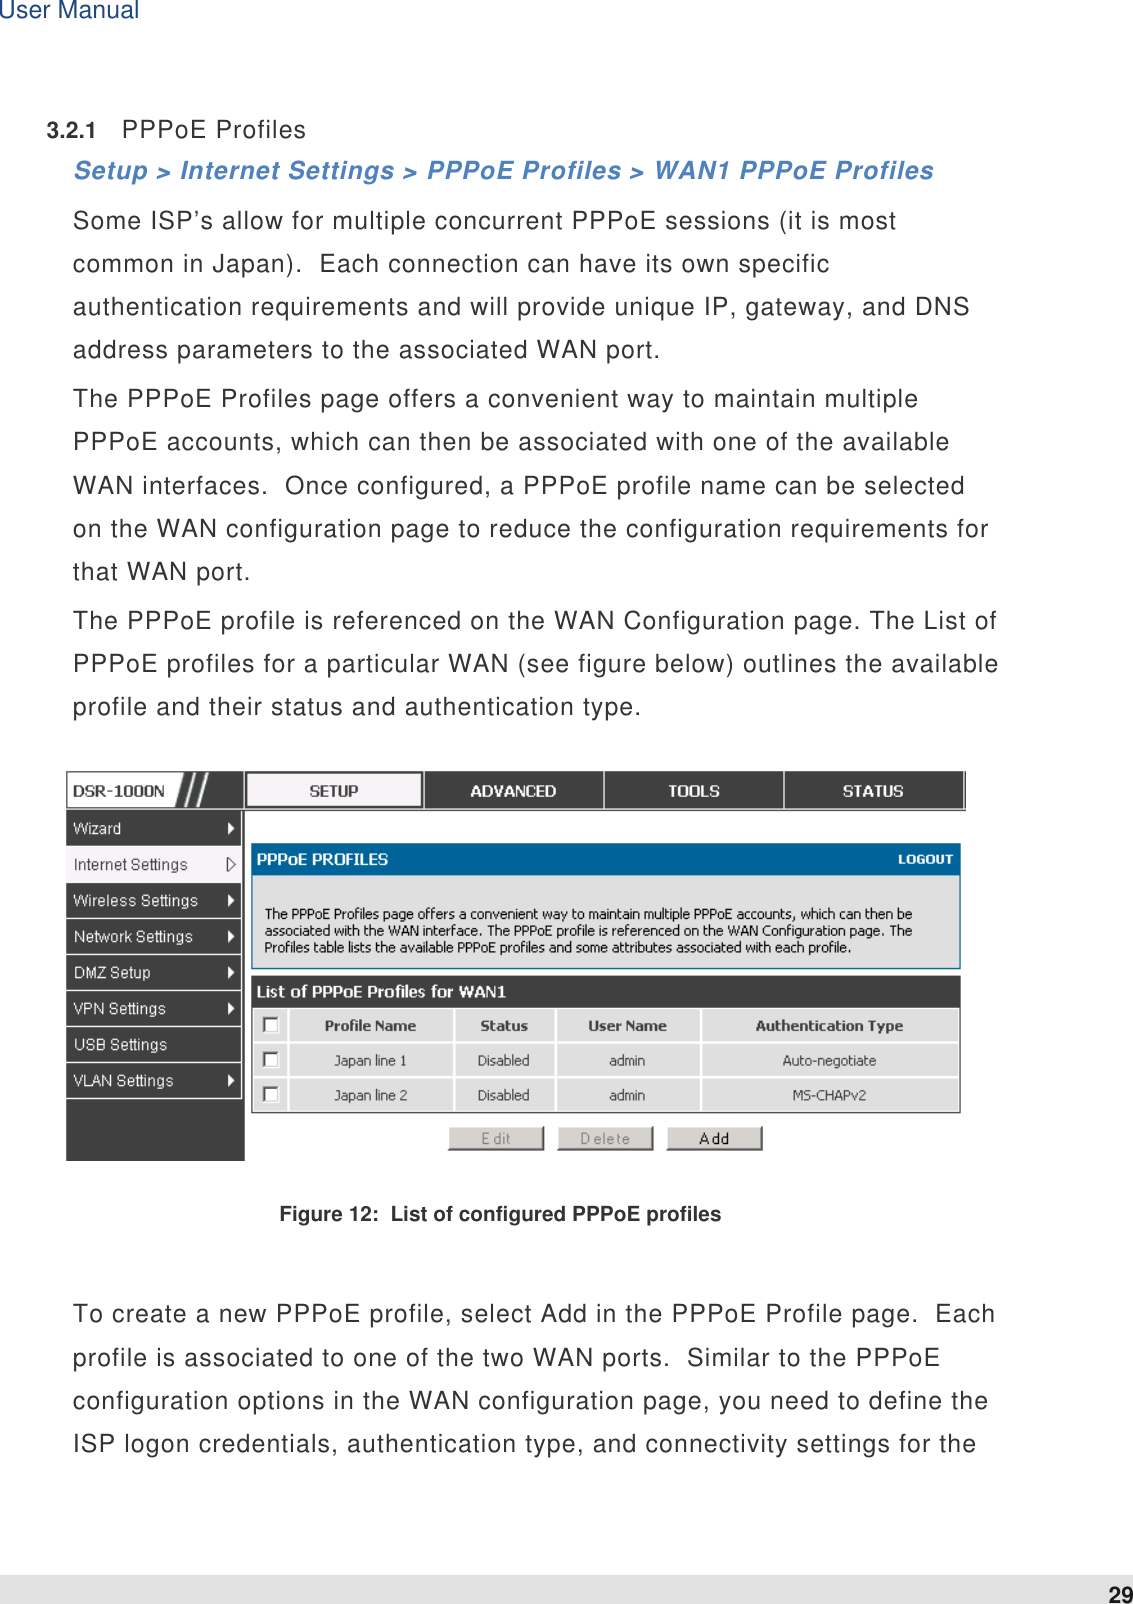 User Manual 29   3.2.1  PPPoE Profiles Setup &gt; Internet Settings &gt; PPPoE Profiles &gt; WAN1 PPPoE Profiles Some ISP’s allow for multiple concurrent PPPoE sessions (it is most common in Japan).  Each connection can have its own specific authentication requirements and will provide unique IP, gateway, and DNS address parameters to the associated WAN port.  The PPPoE Profiles page offers a convenient way to maintain multiple PPPoE accounts, which can then be associated with one of the available WAN interfaces.  Once configured, a PPPoE profile name can be selected on the WAN configuration page to reduce the configuration requirements for that WAN port.  The PPPoE profile is referenced on the WAN Configuration page. The List of PPPoE profiles for a particular WAN (see figure below) outlines the available profile and their status and authentication type.    Figure 12:  List of configured PPPoE profiles  To create a new PPPoE profile, select Add in the PPPoE Profile page.  Each profile is associated to one of the two WAN ports.  Similar to the PPPoE configuration options in the WAN configuration page, you need to define the ISP logon credentials, authentication type, and connectivity settings for the 